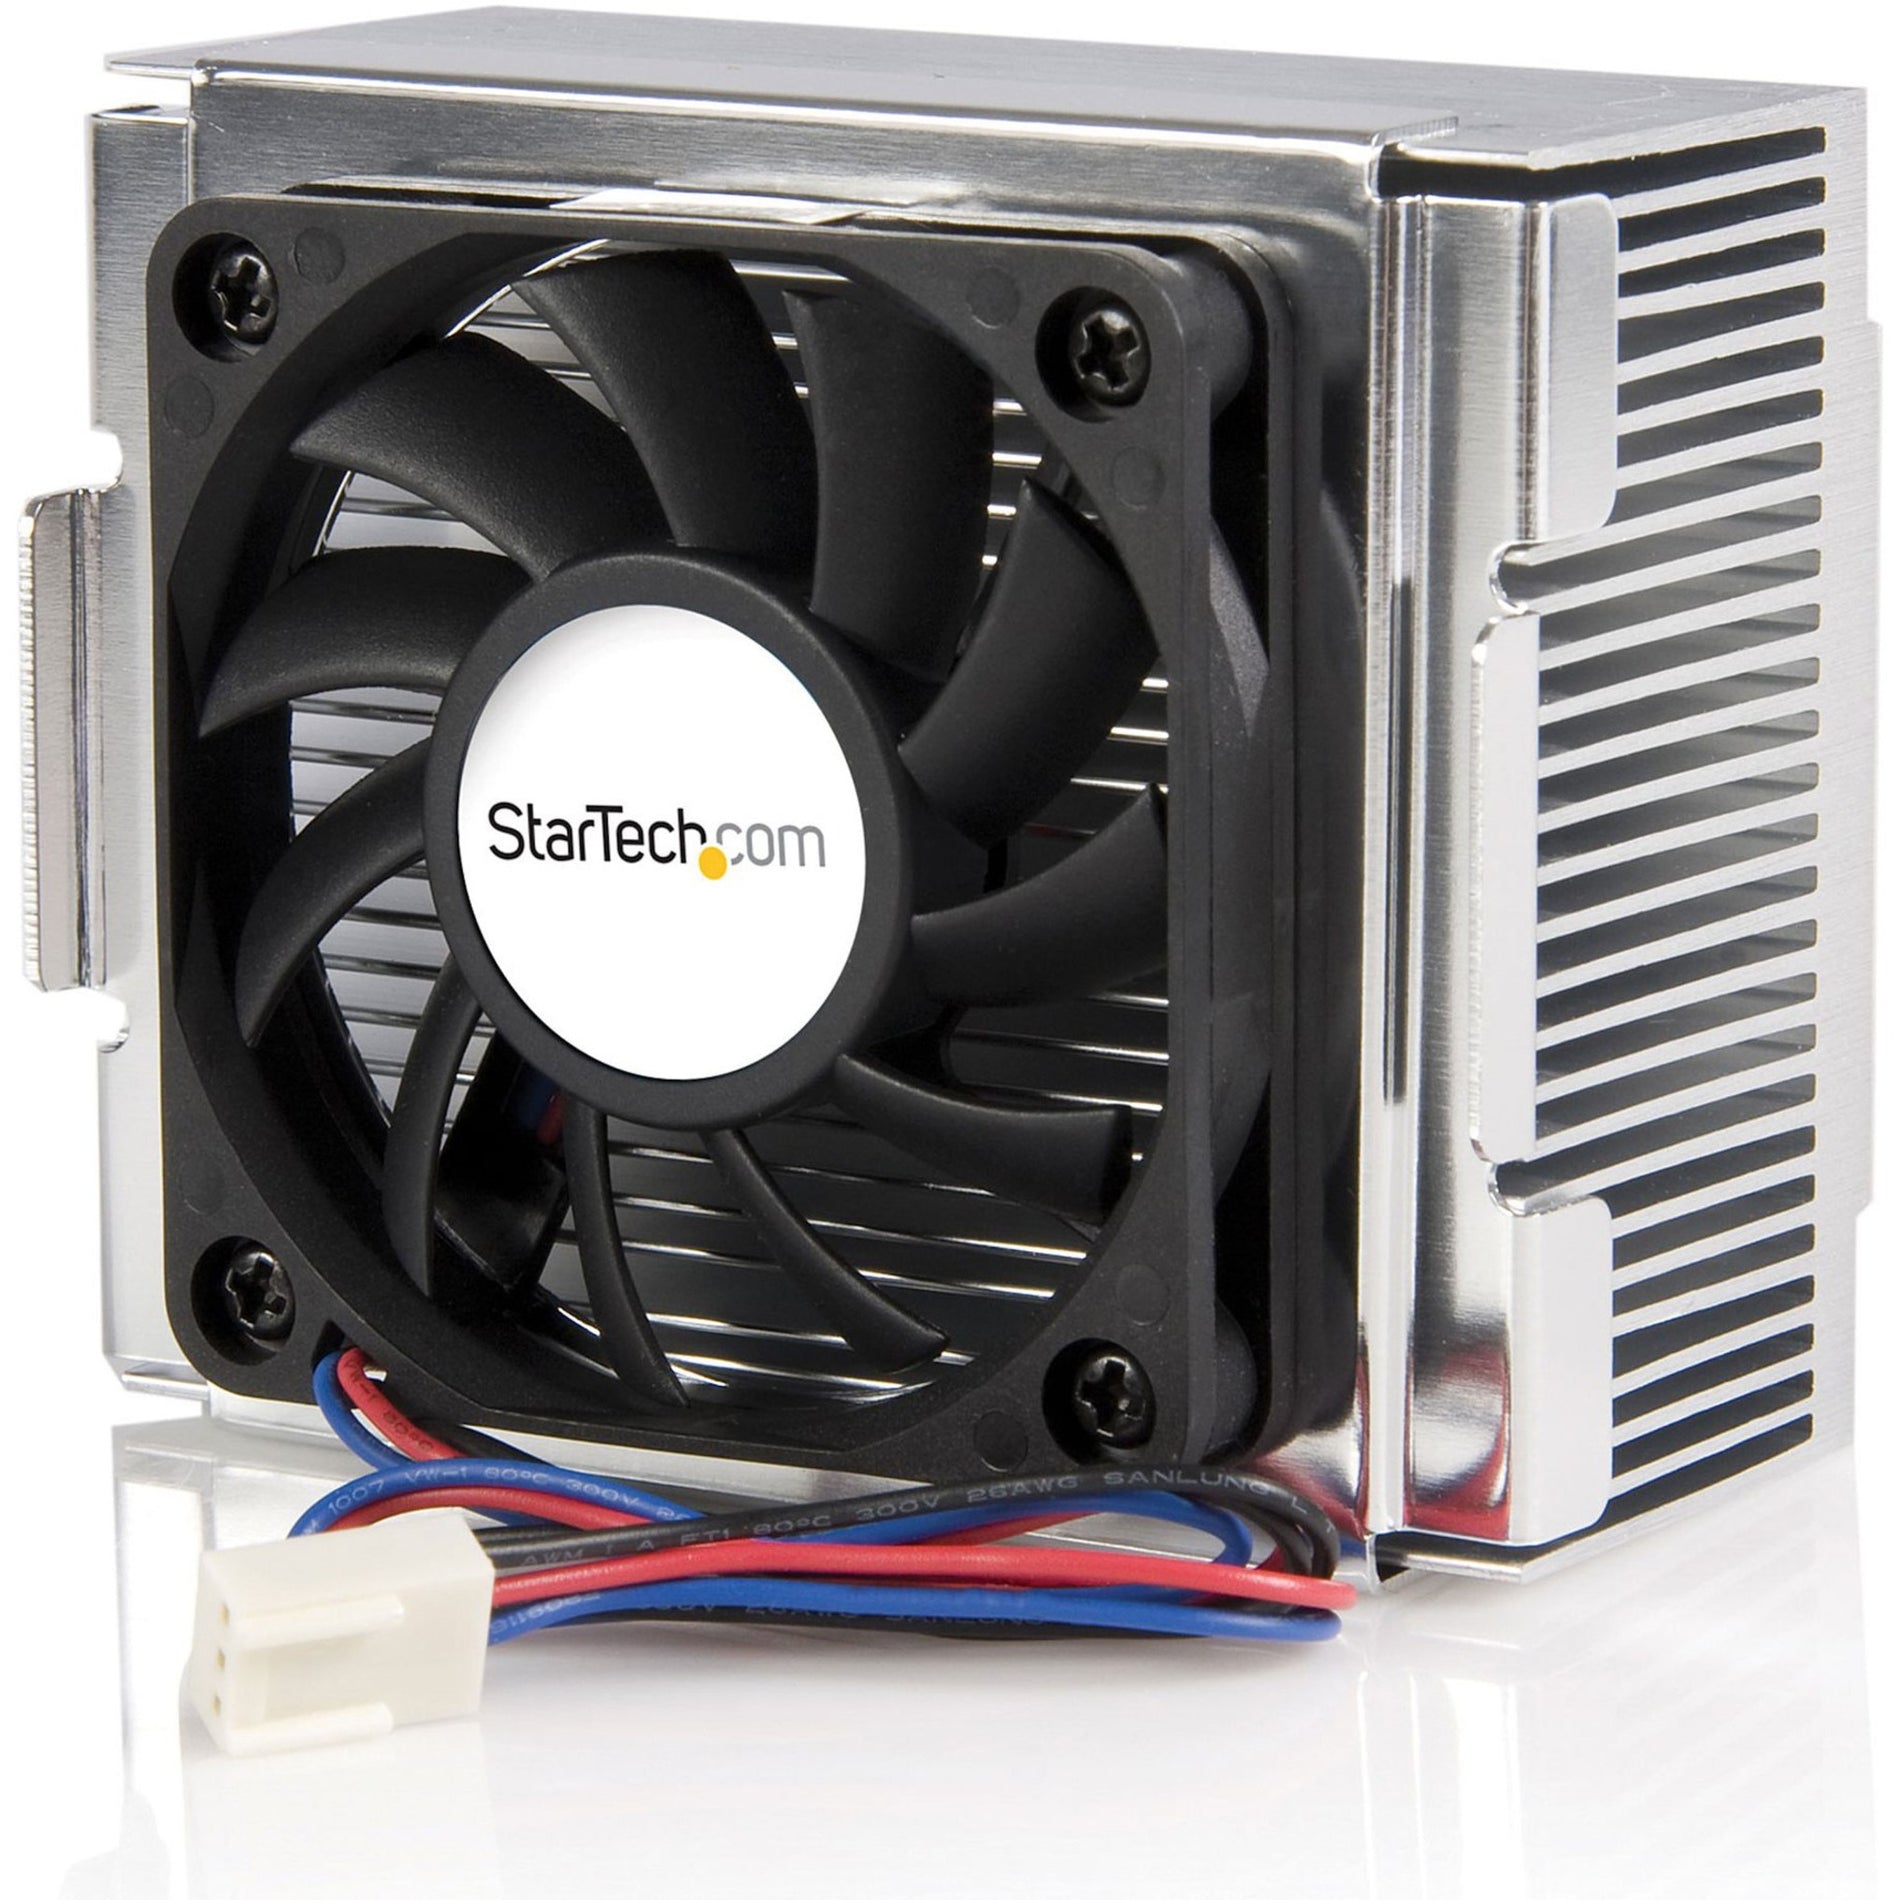 StarTech.com FAN478 Cooling Fan/Heatsink, Reliable and Effective Cooling Solution for Socket-478 Motherboards